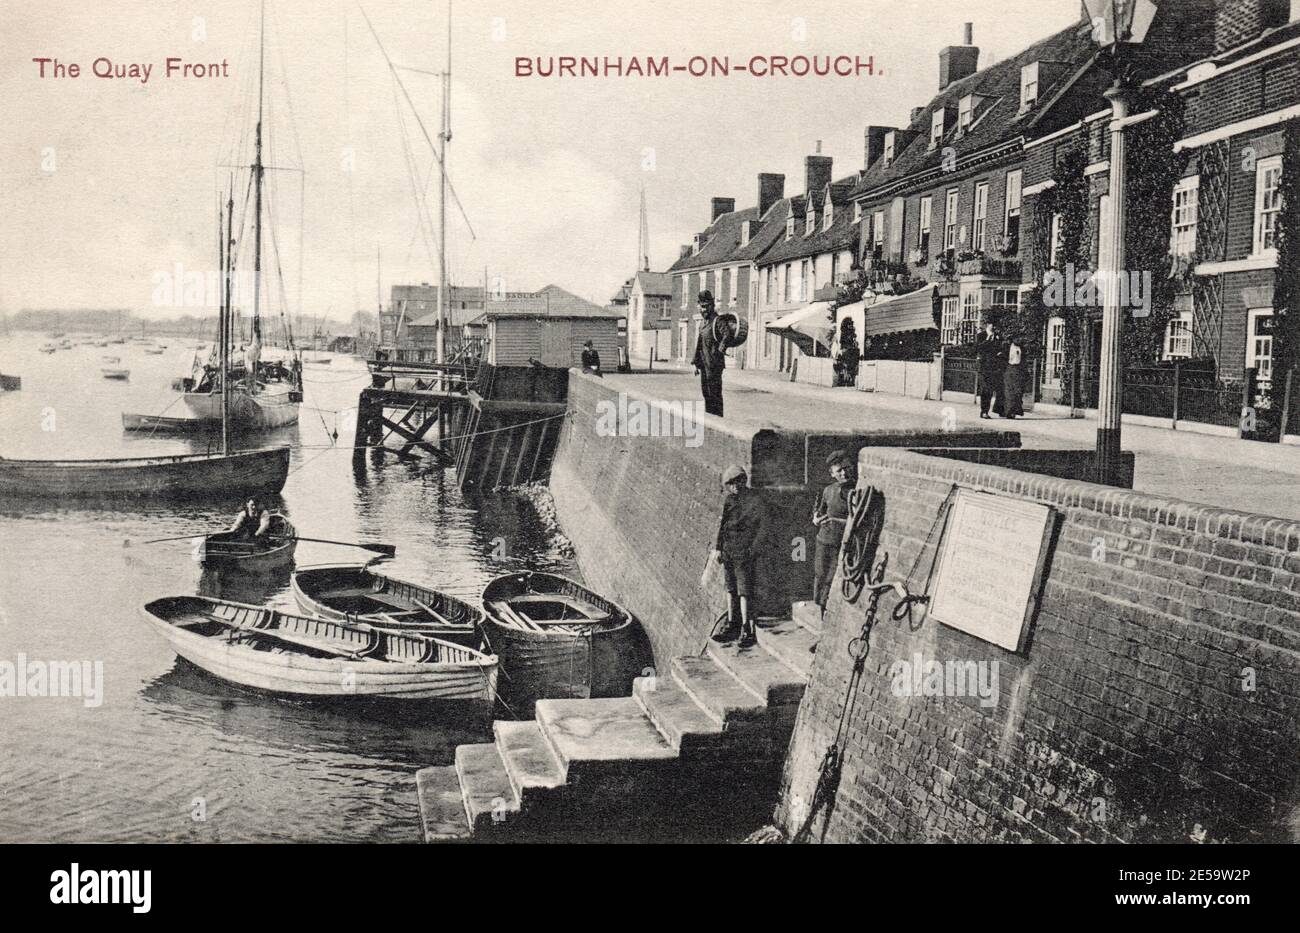 The Quay Front, Burnham-on-Crouch, Essex 1906. Originally produced as a Postcard in the early 1900's. High quality scan and restored from a postcard dated 18th October 1906 Stock Photo